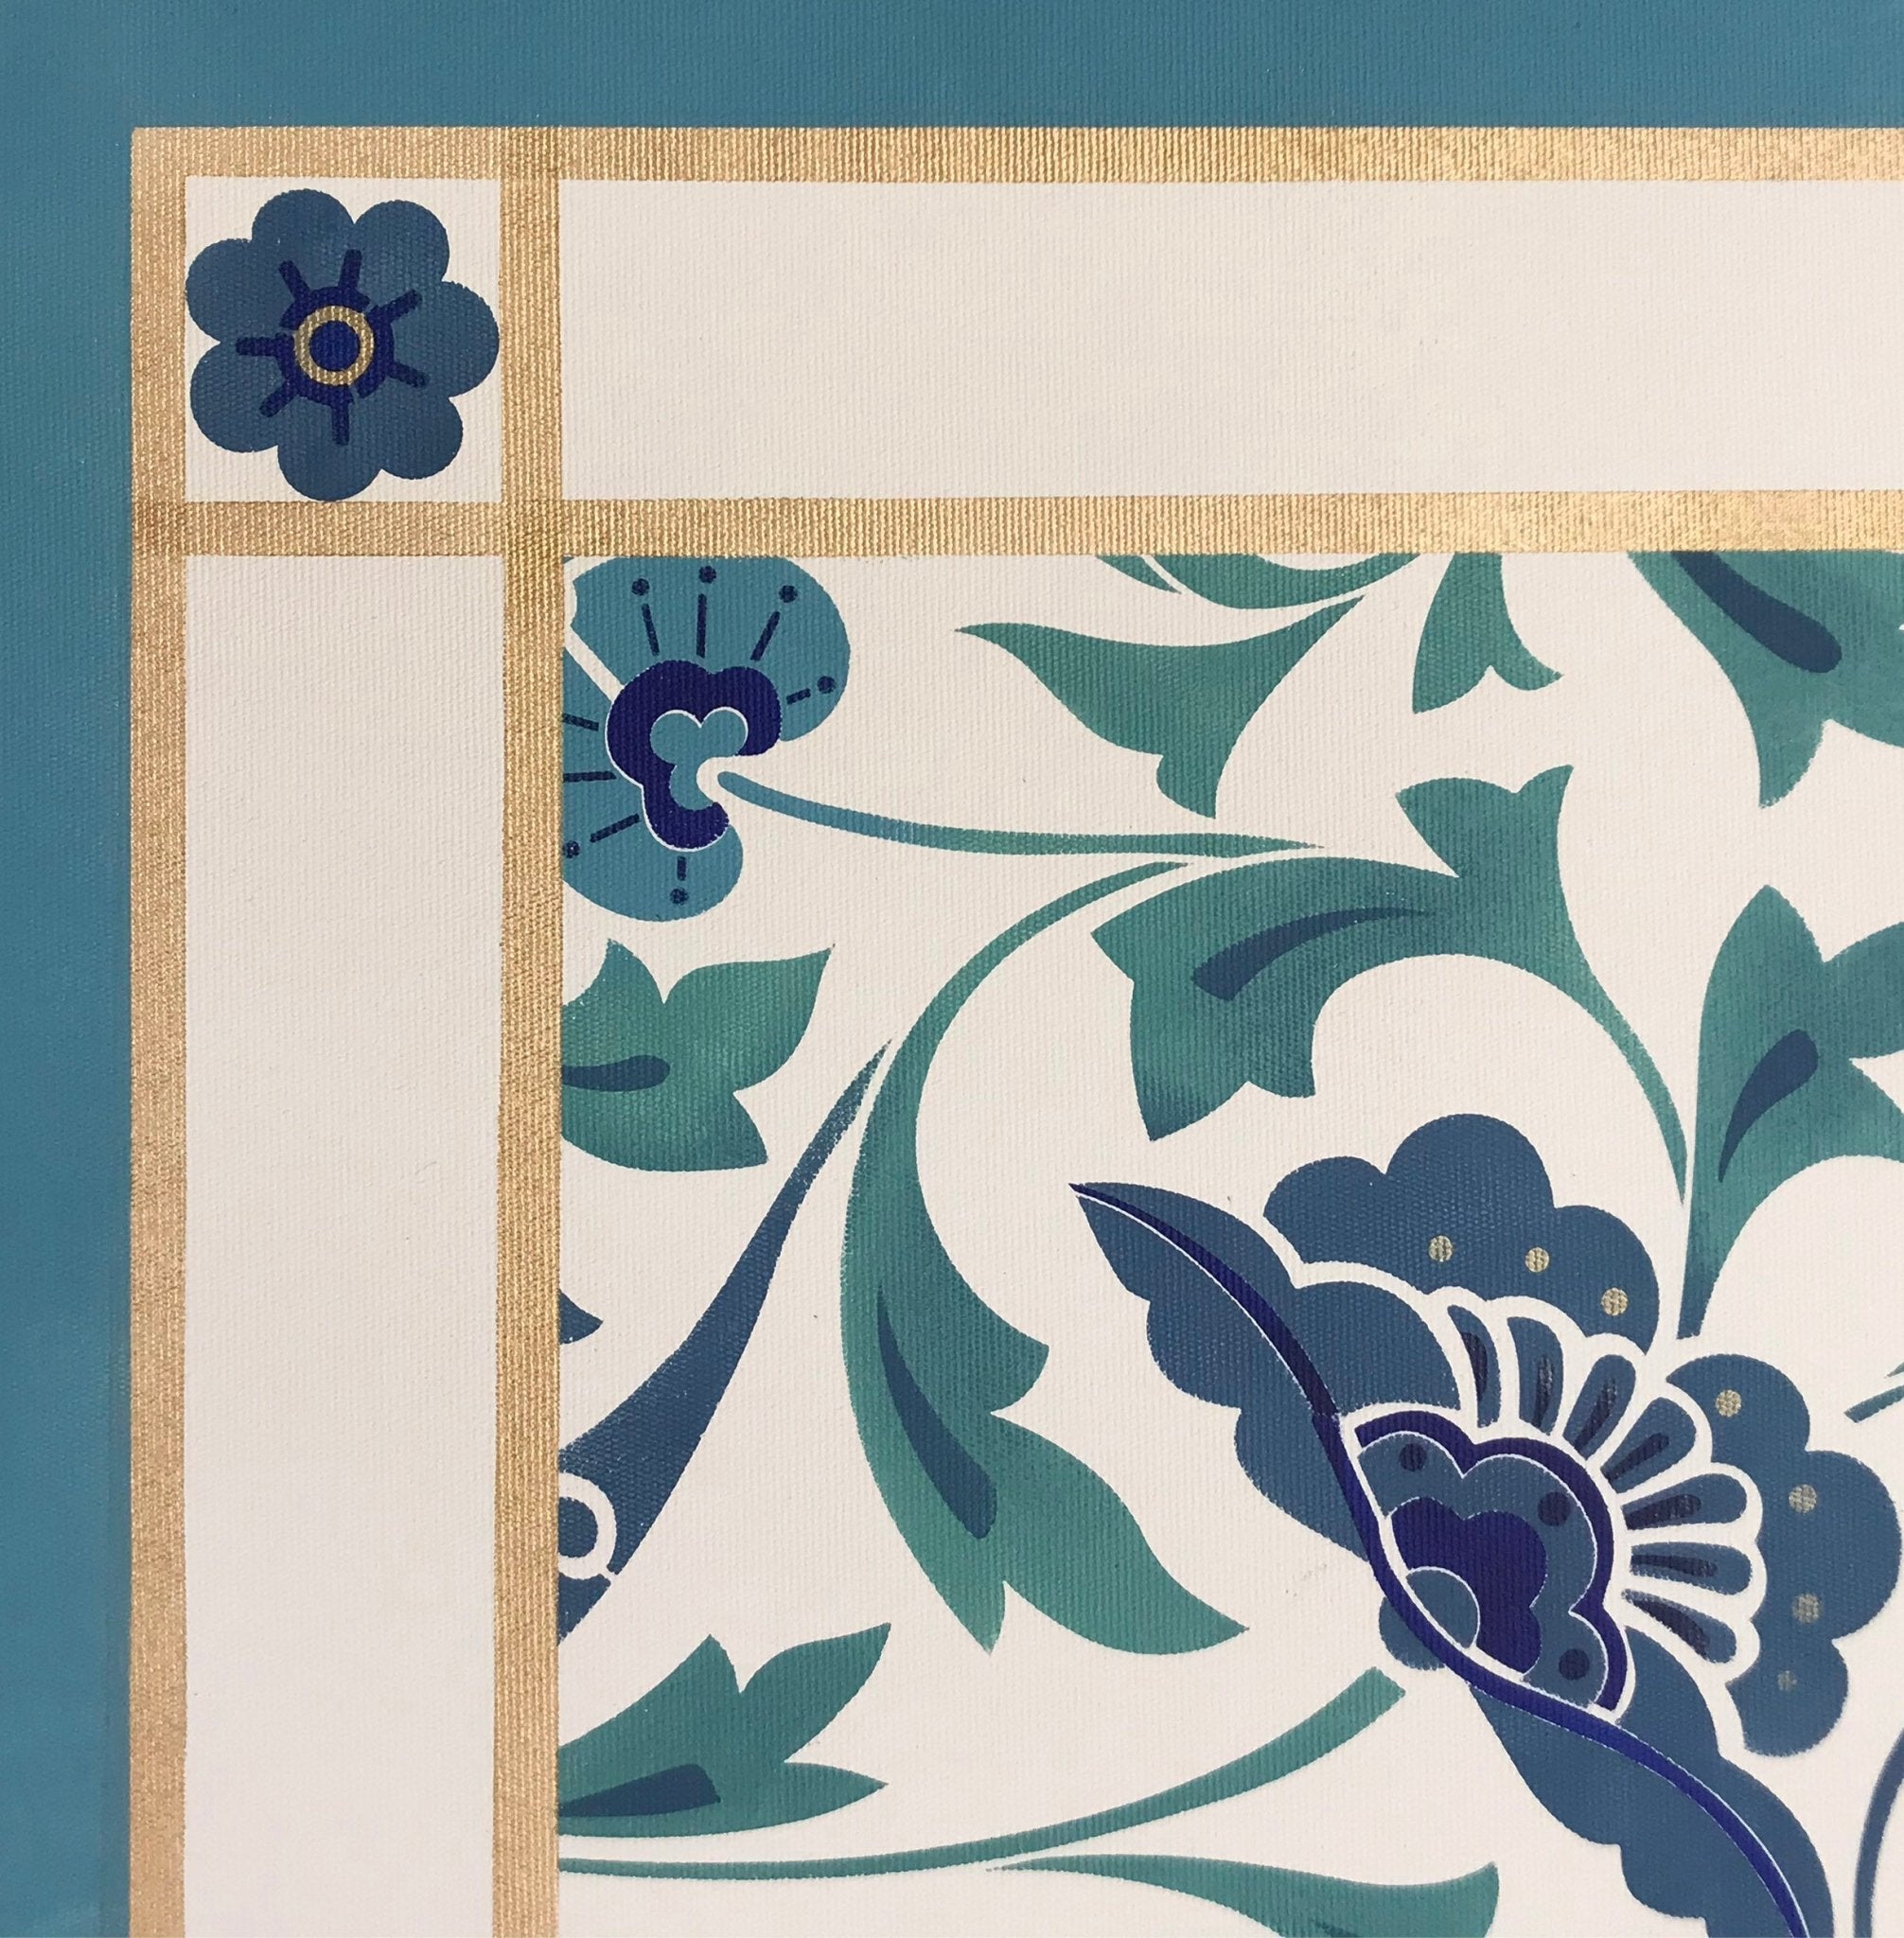 The close-up corner view of this floorcloth with its banded border and floral corner adornments.